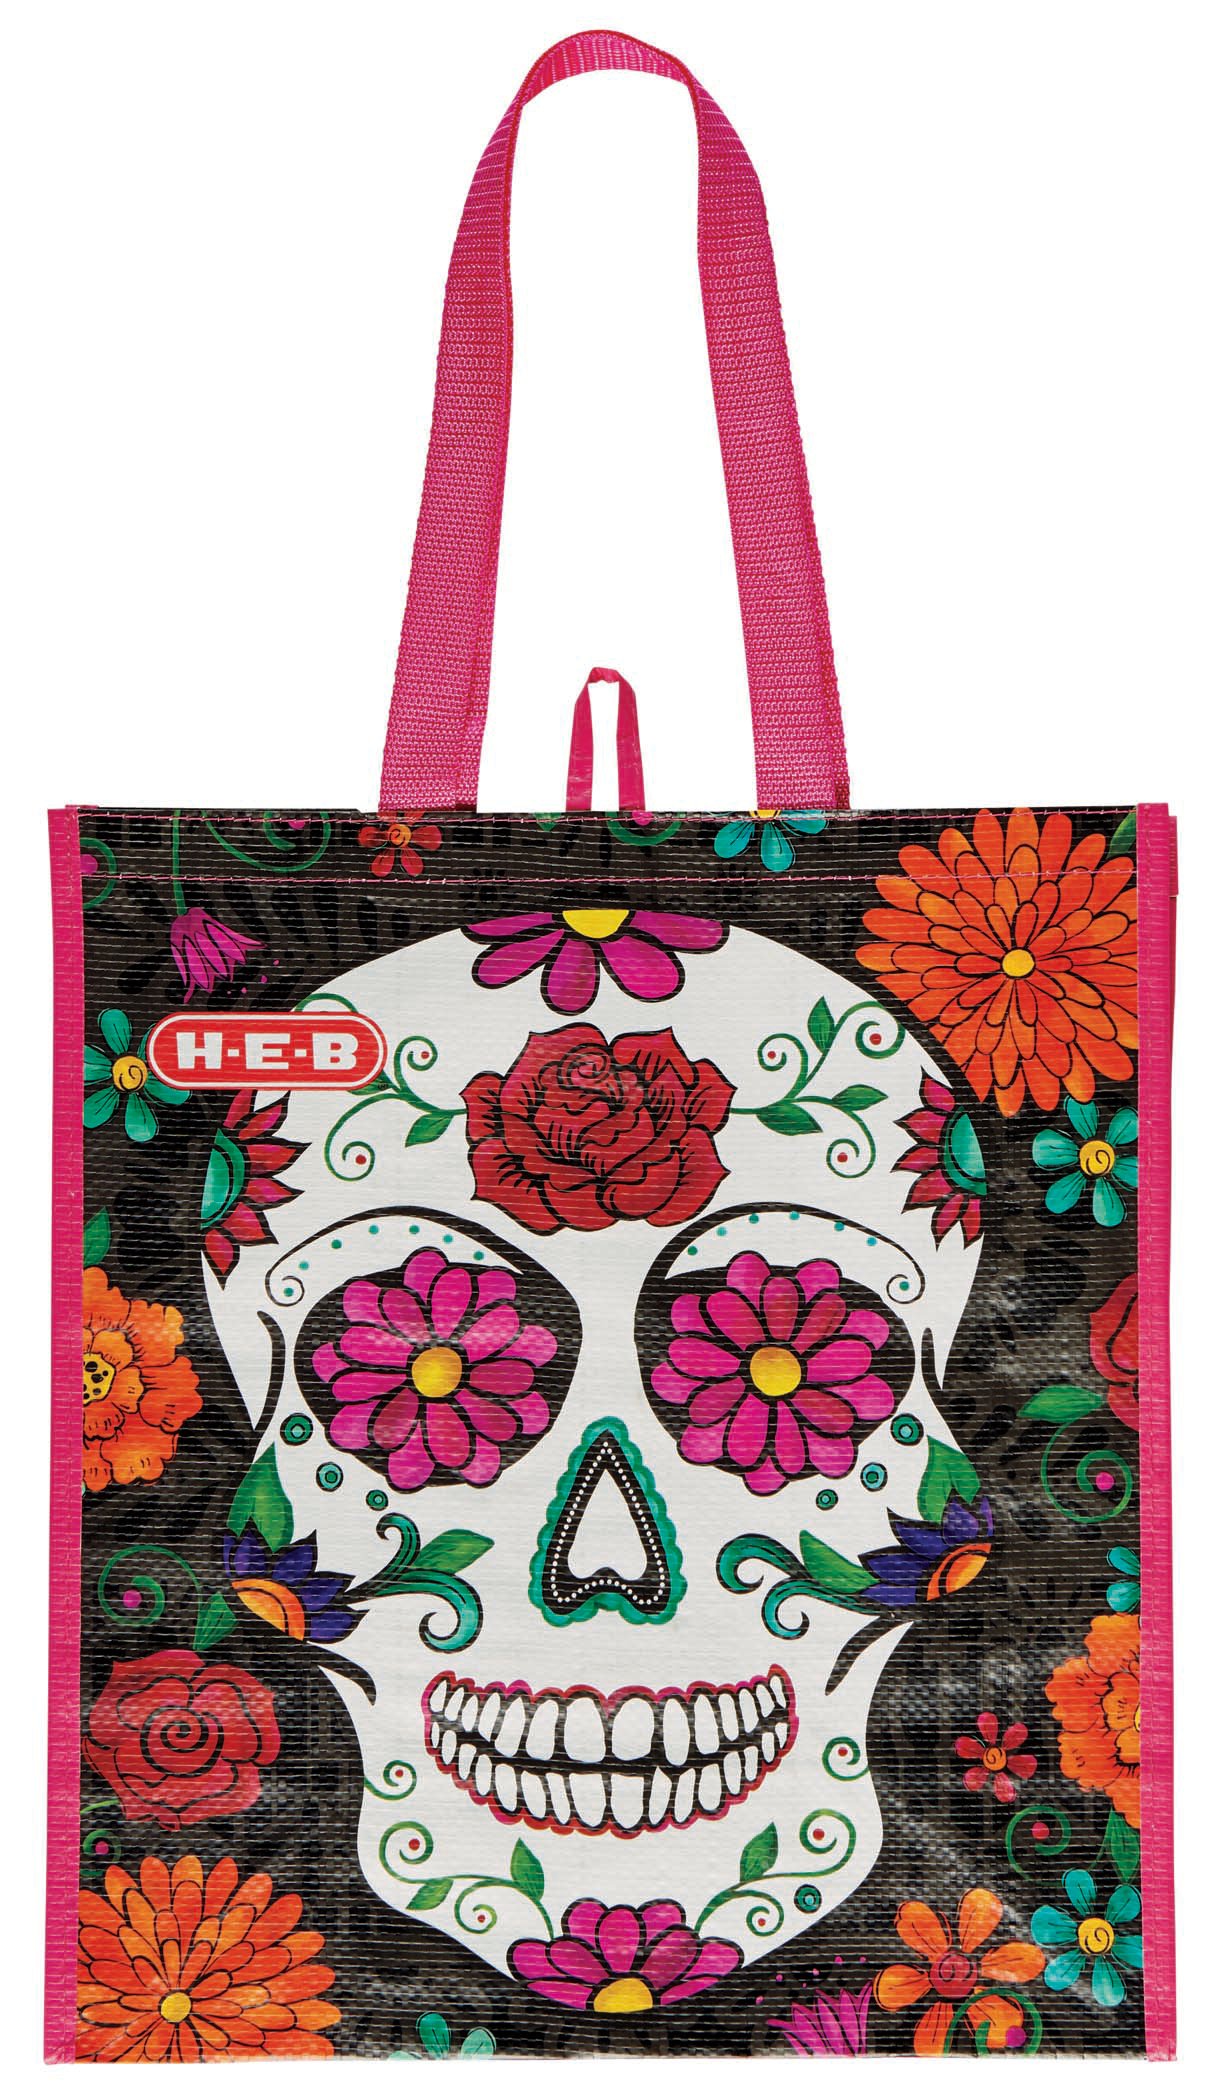 ZzWwR Day of The Dead Sugar Skull Cactus Floral Extra Large Canvas Market Beach Travel Reusable Grocery Shopping Tote Bag Portable Storage HandBags 